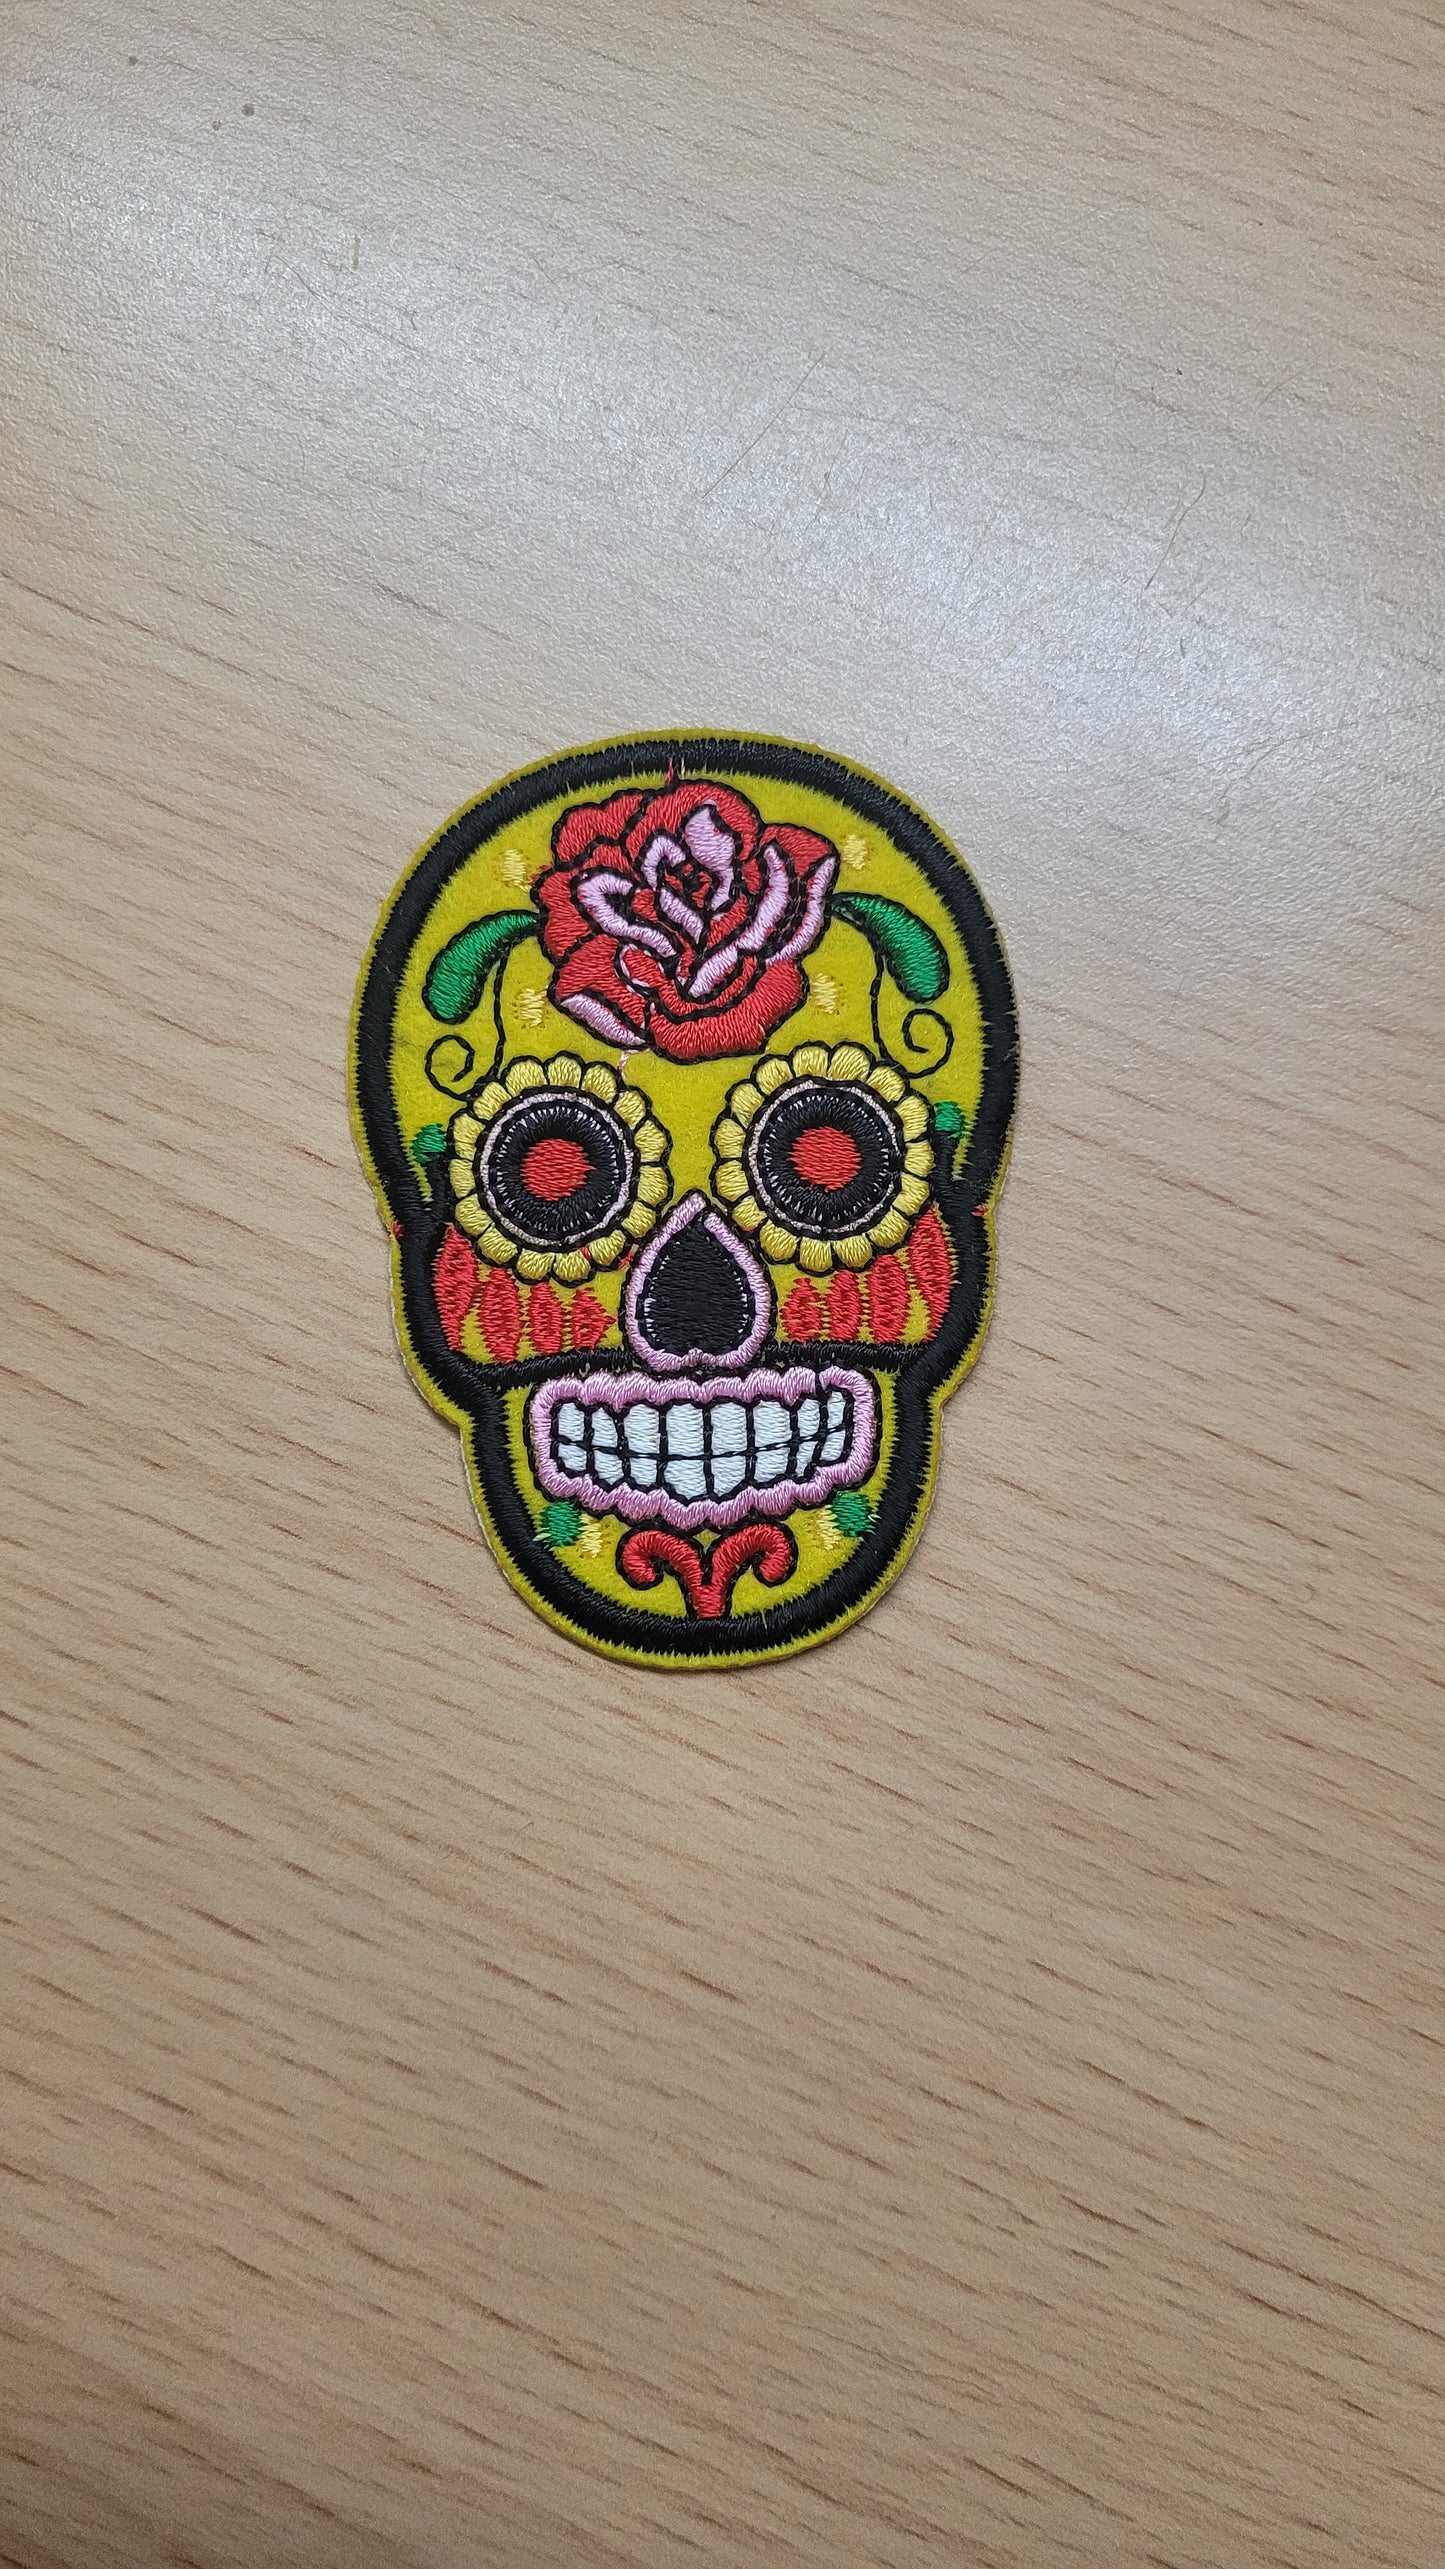 Skull iron on embroidered patches